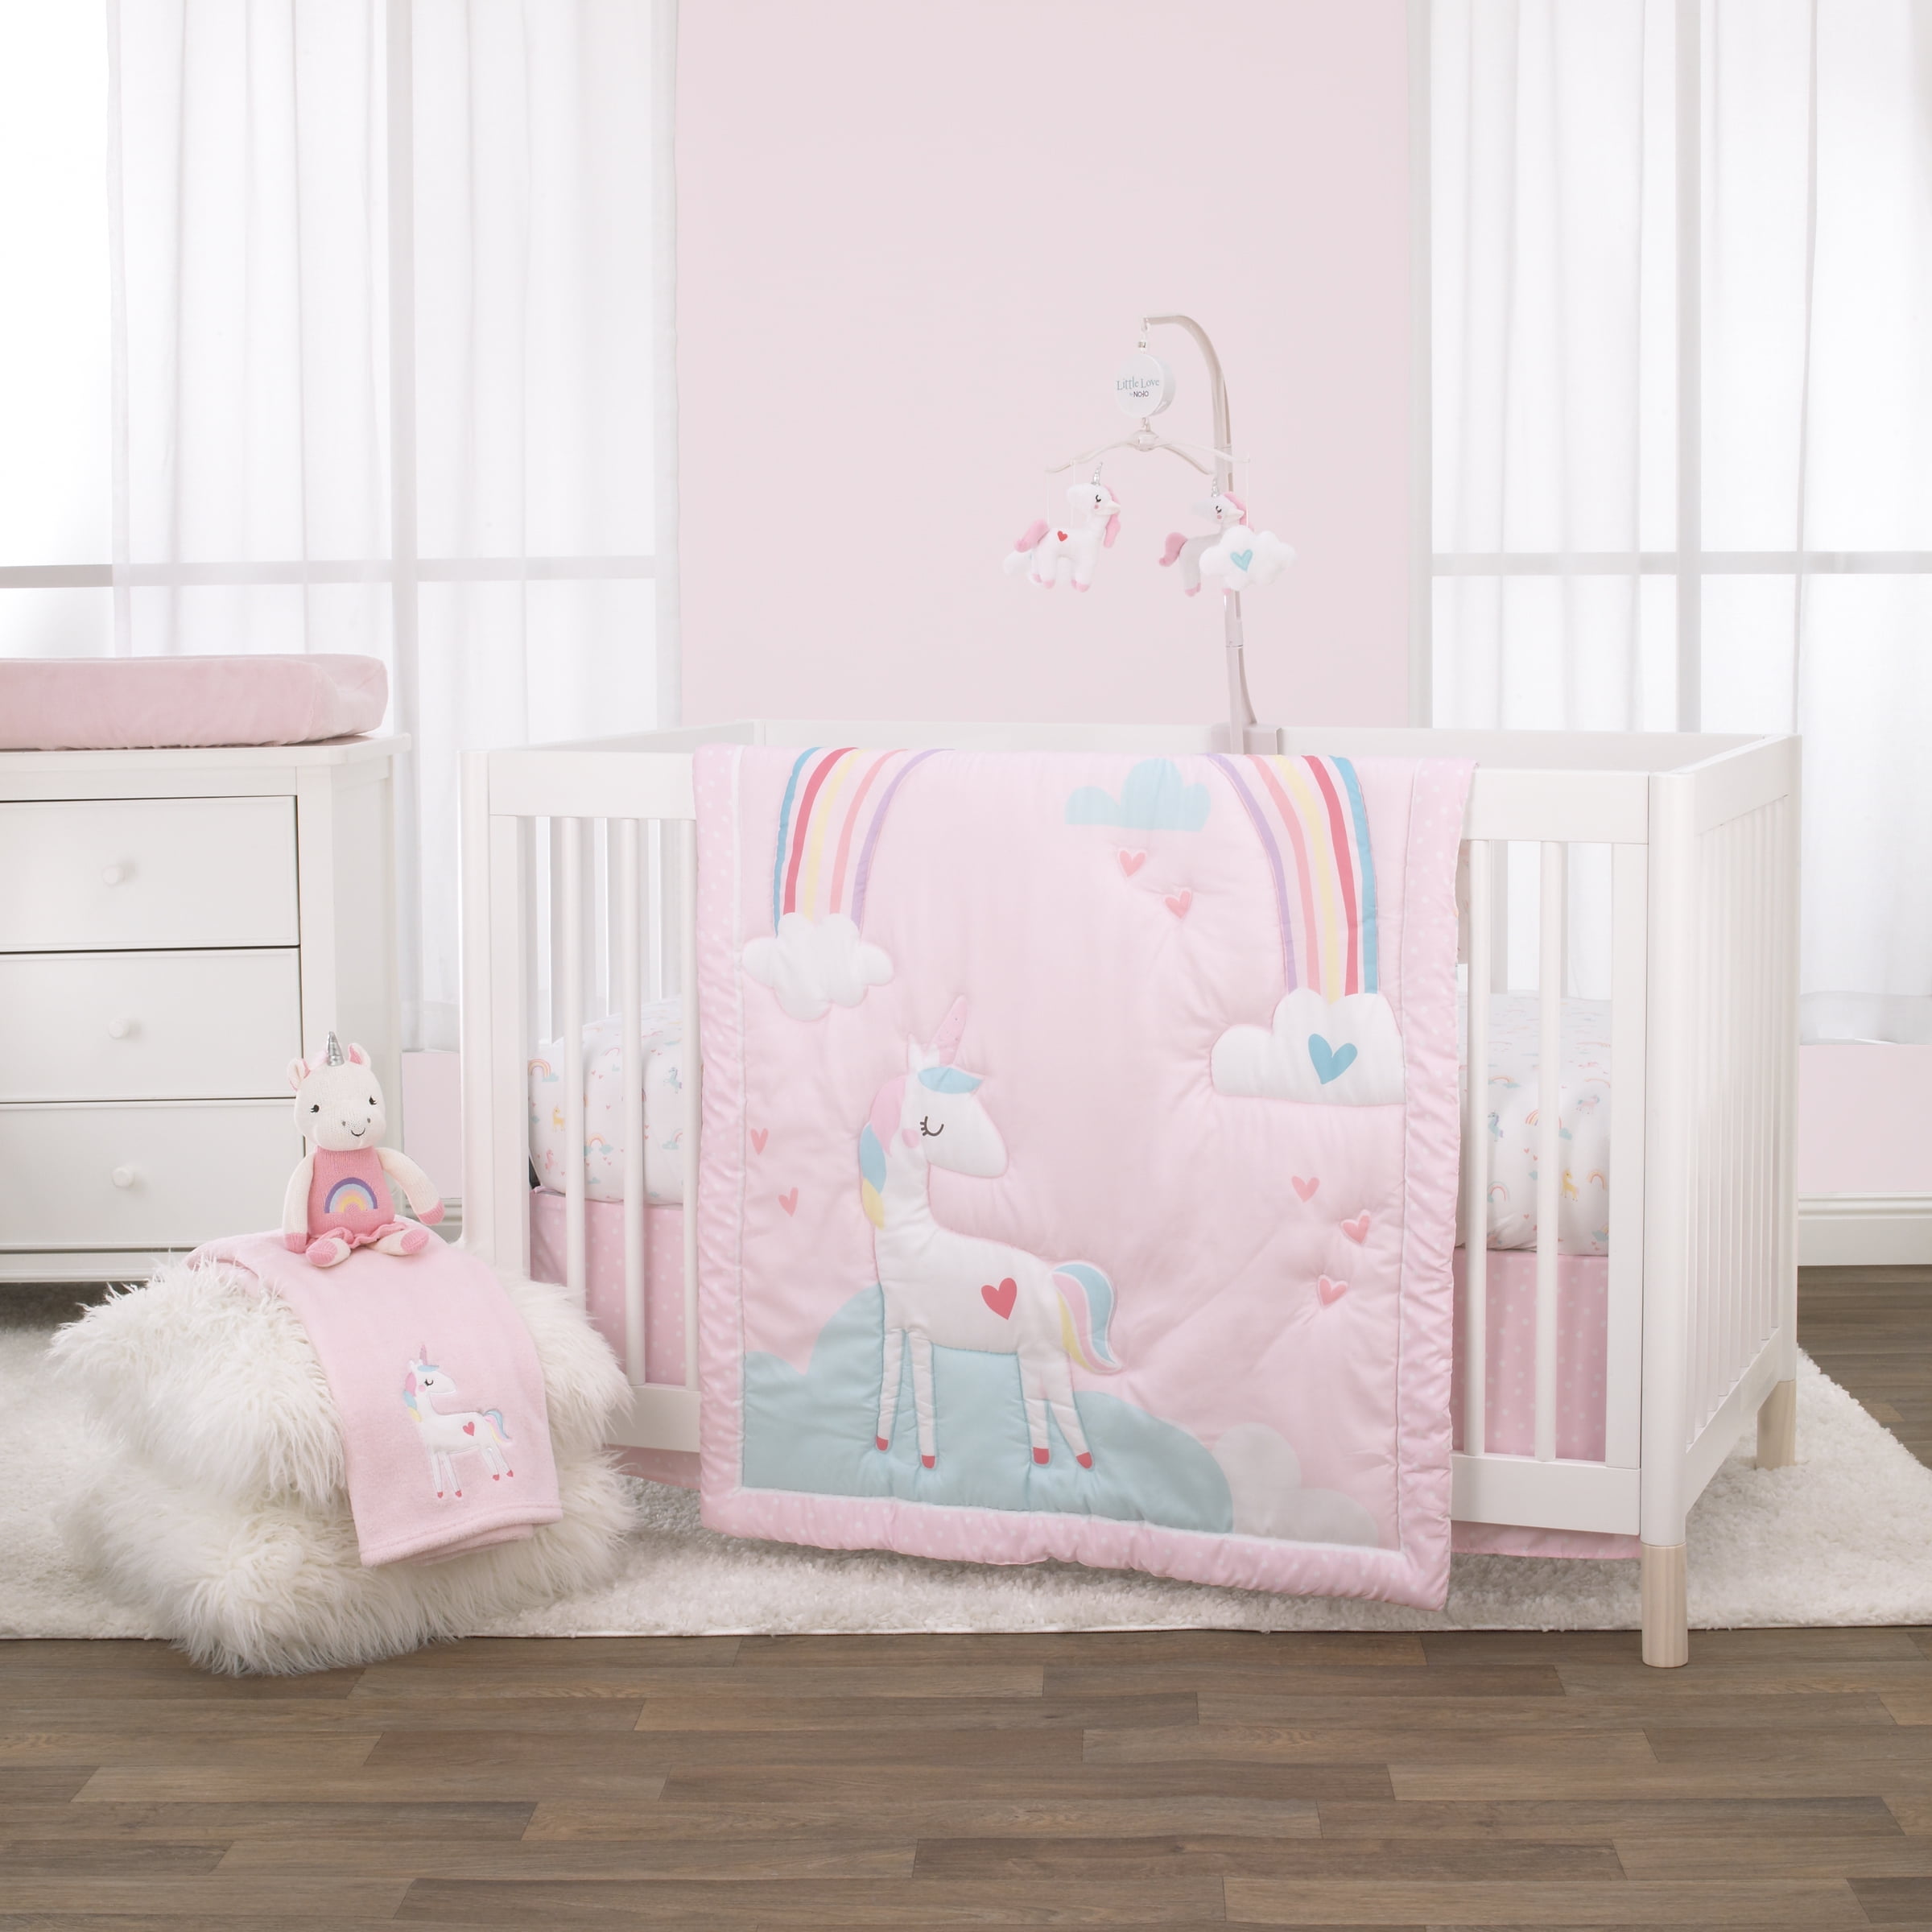 Dolls Wooden Pink Star Moon Rocking Cradle Bed Cot Girls Toy with Bedding 